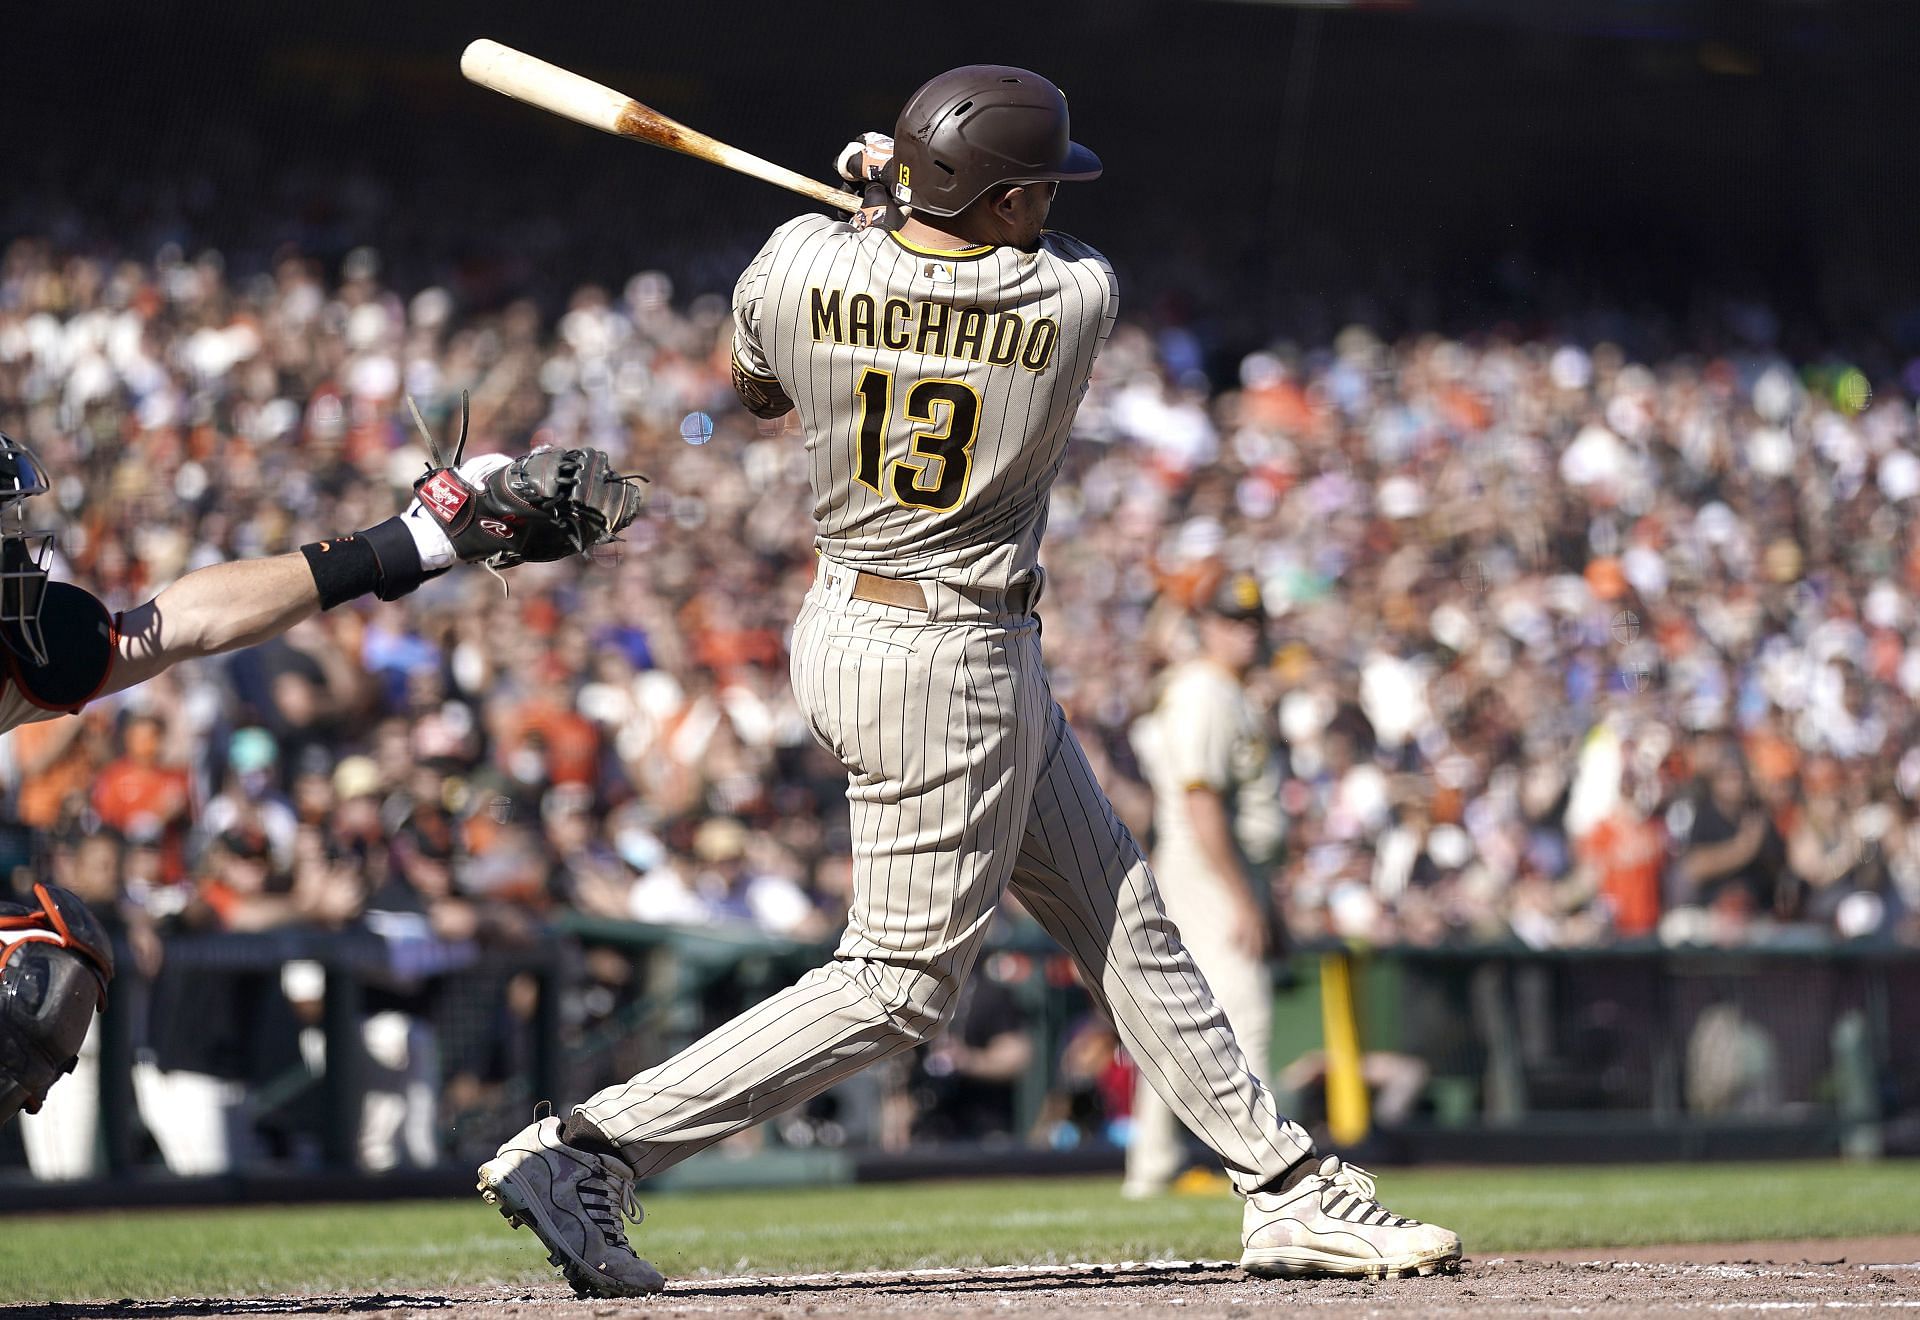 Manny Machado will need to step up for the San Diego Padres